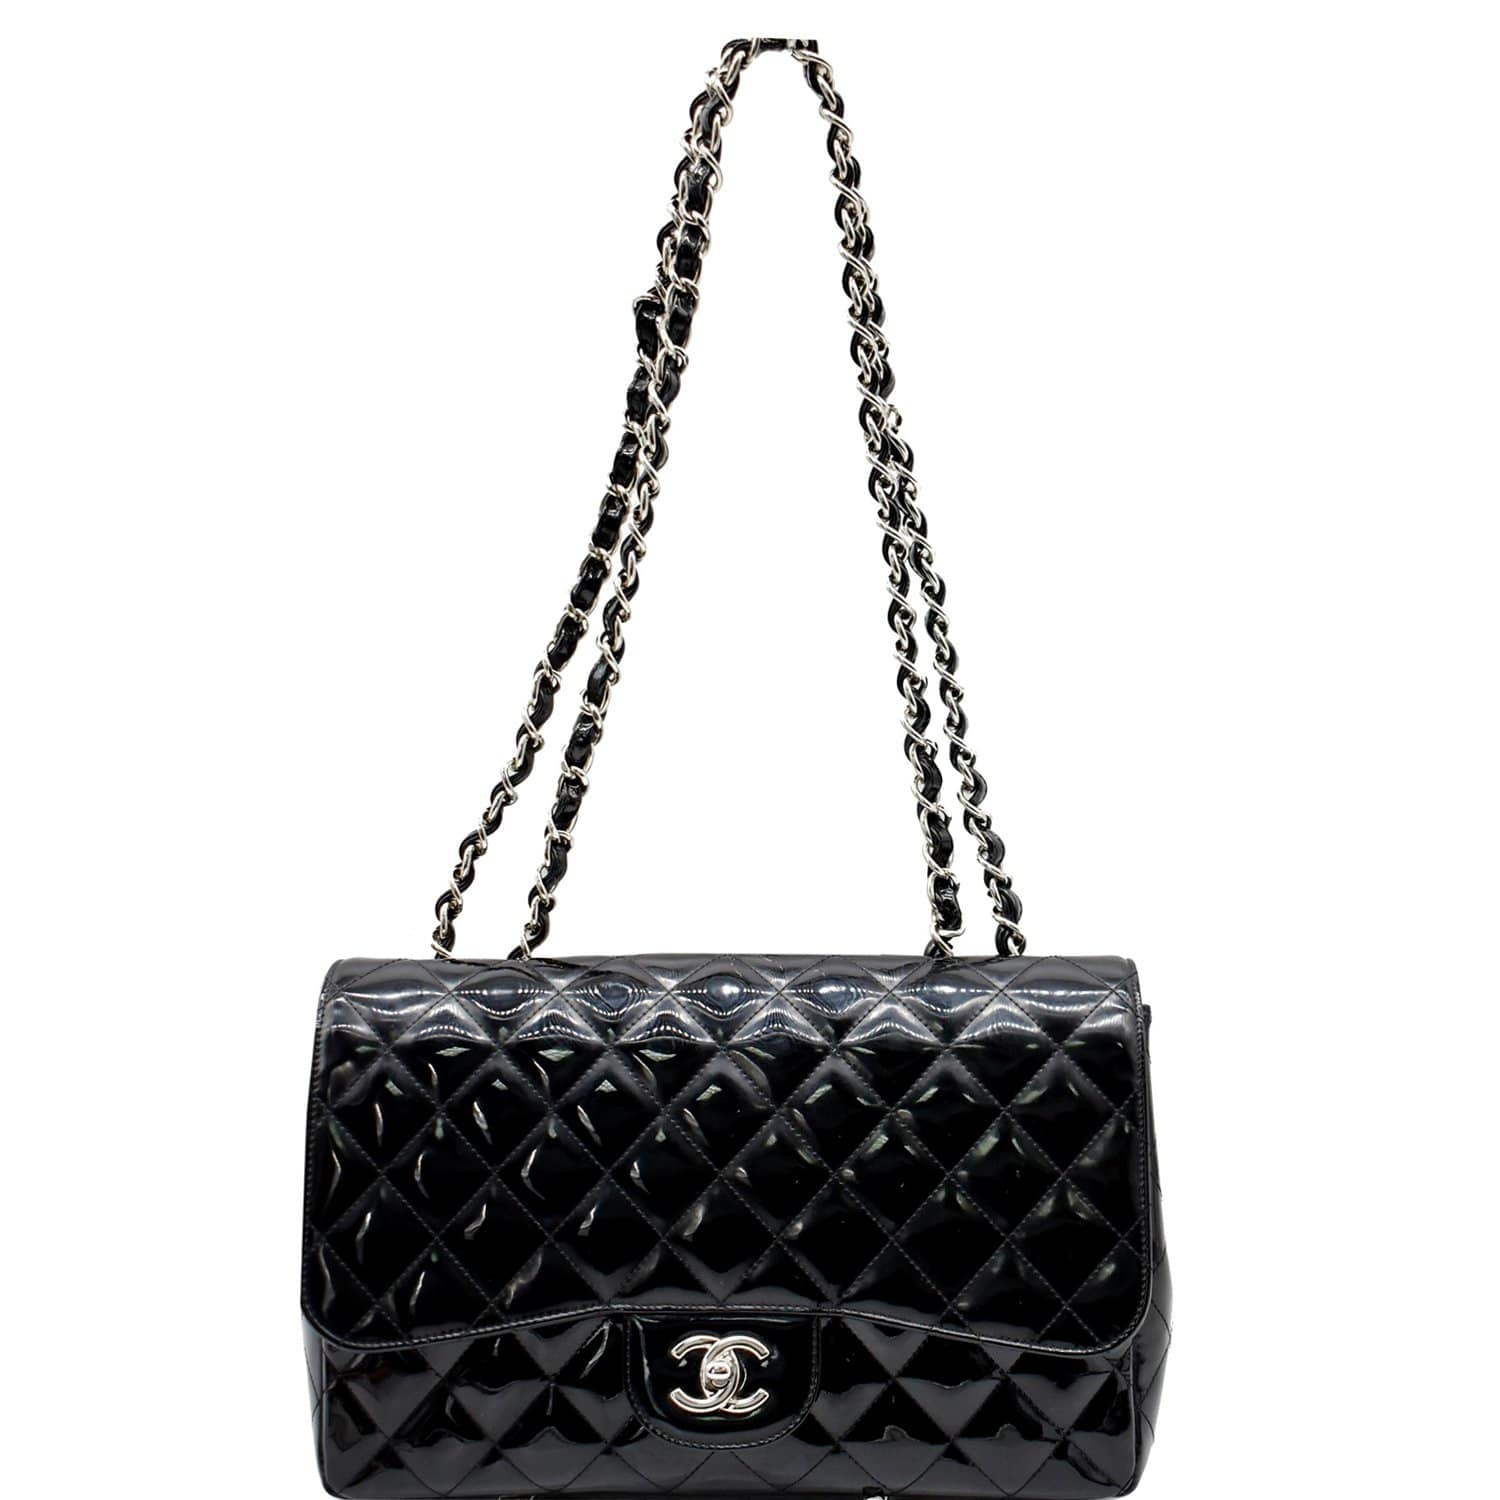 Chanel Black Chevron Quilted Patent Leather Jumbo Classic Single Flap Bag, myGemma, CH